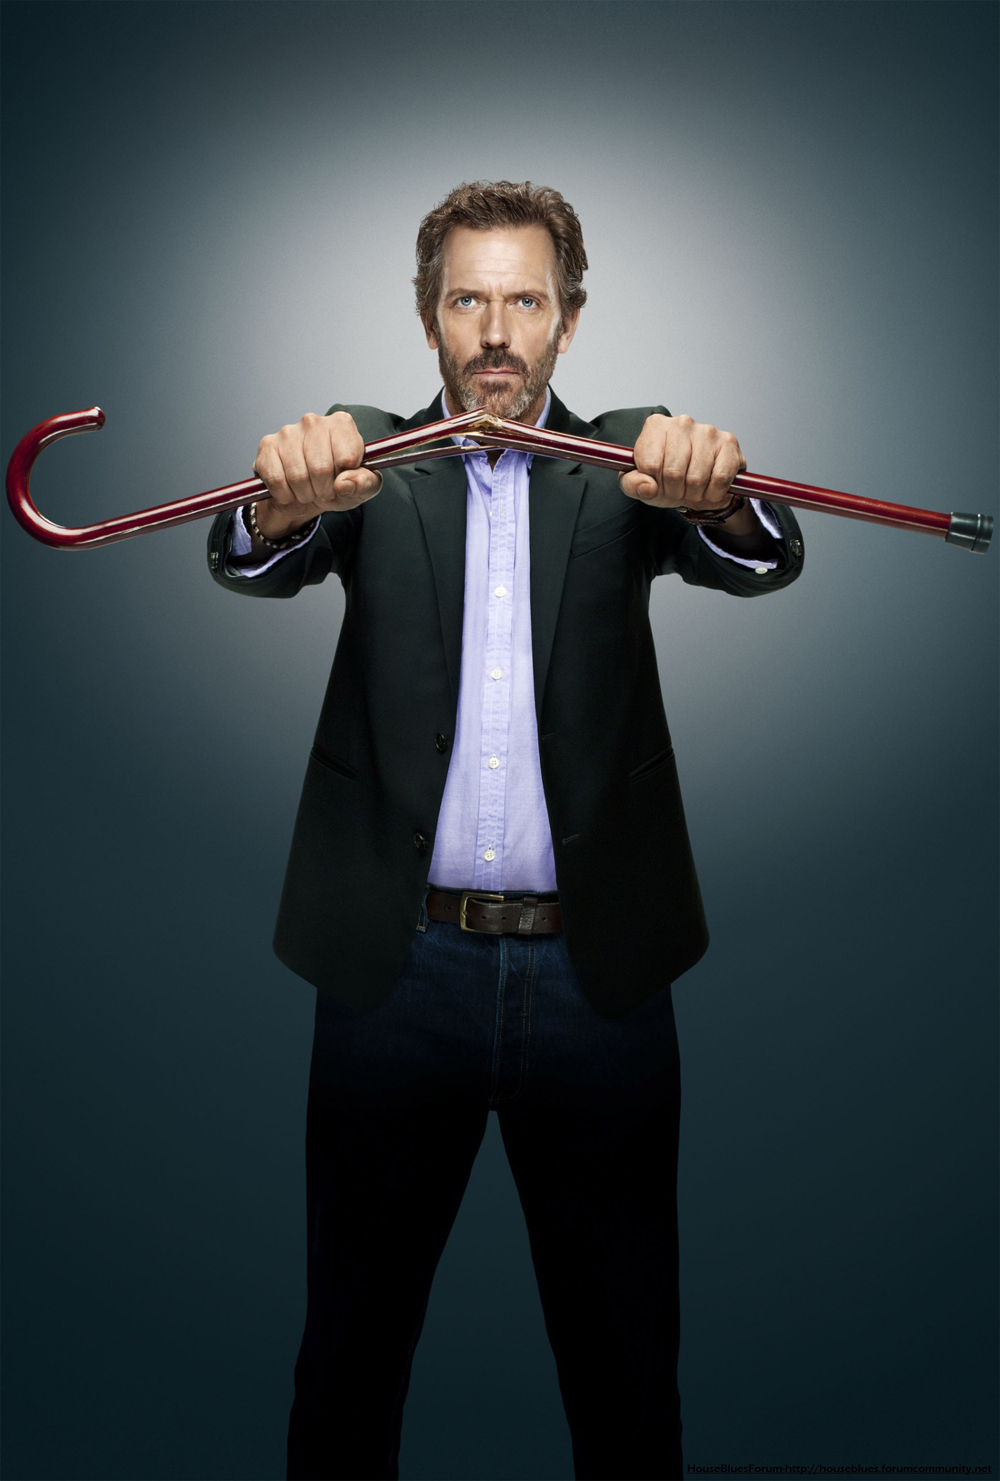 dr gregory house